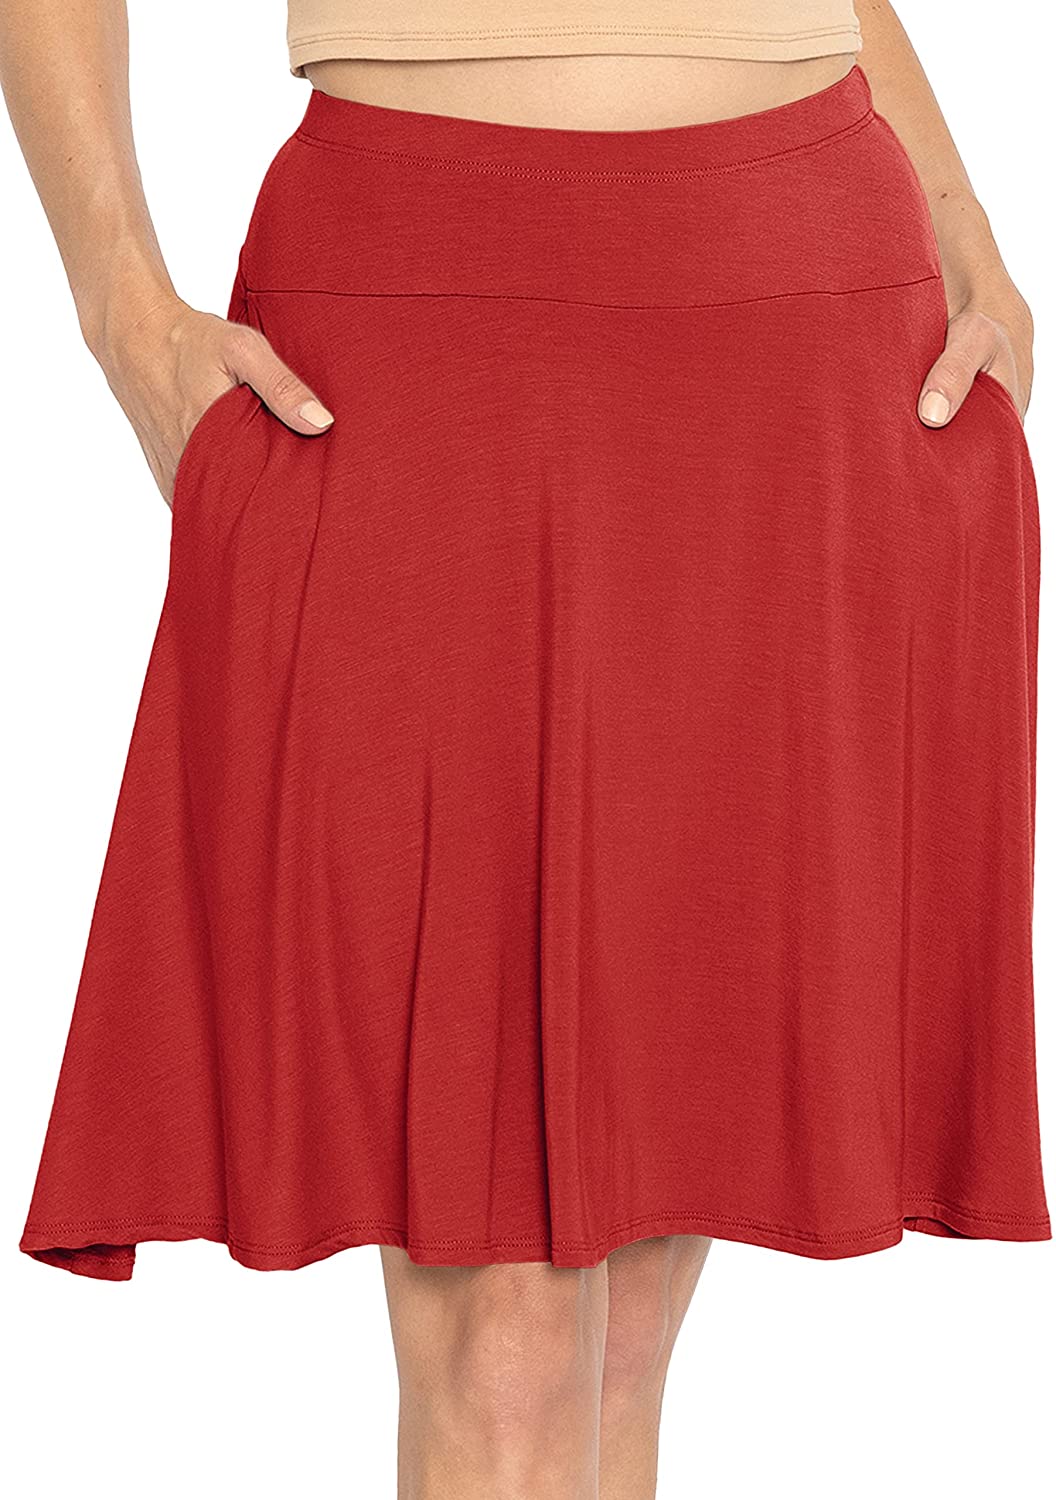 Stretch is Comfort Women's and Plus Size A-Line Skirt with Pockets